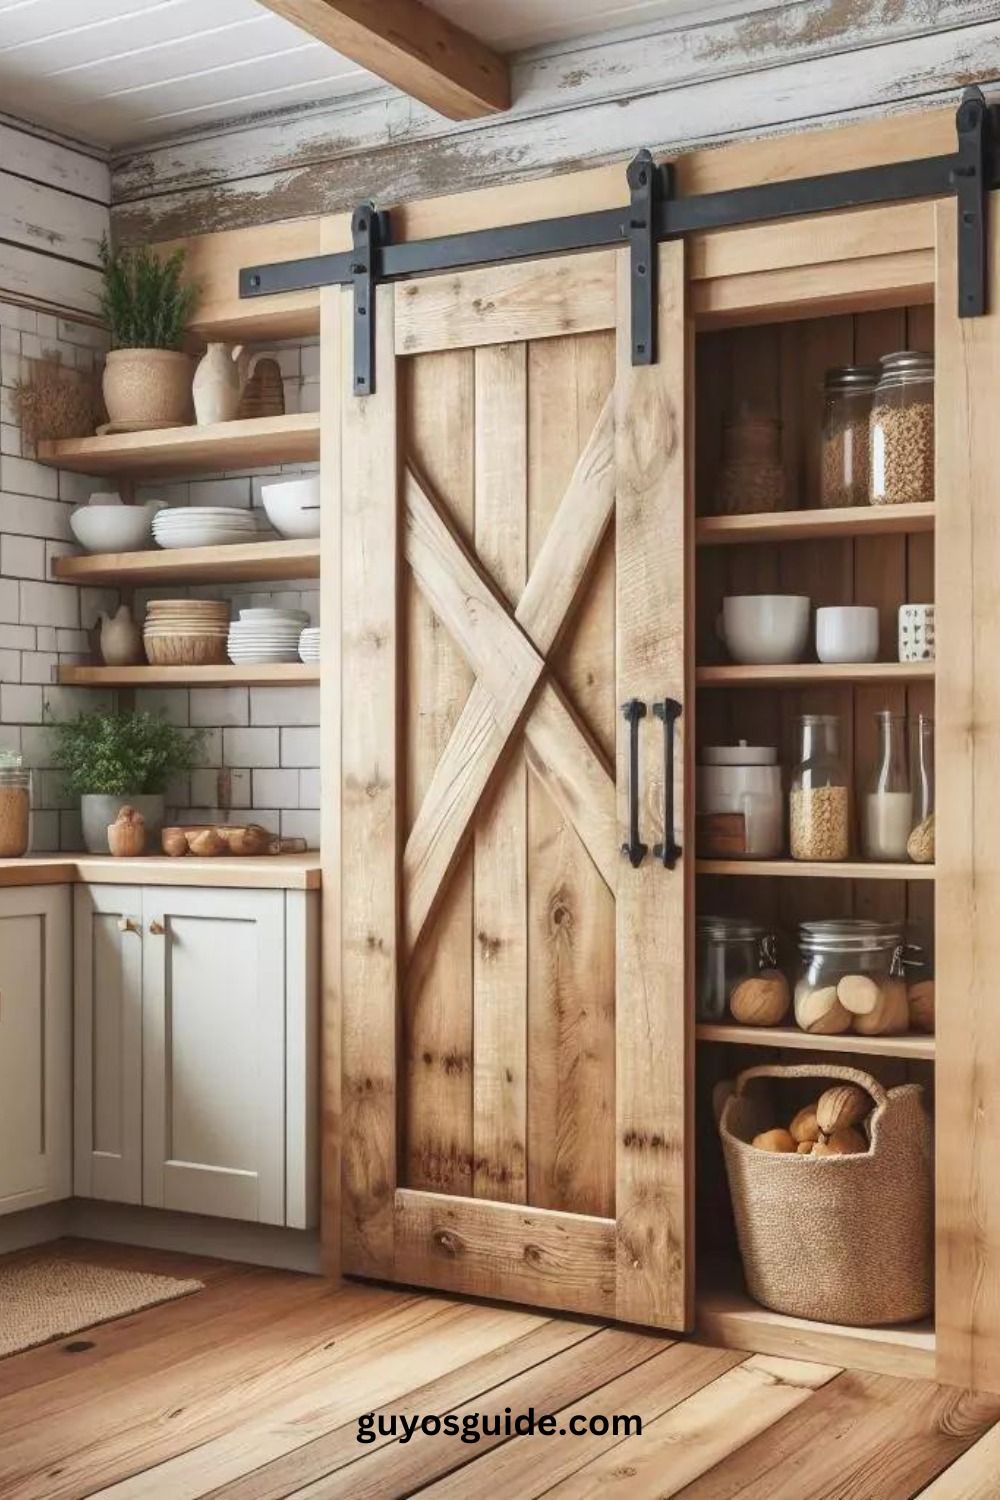 Rustic Charm: Inspiring Kitchen Ideas  for a Cozy Country Retreat